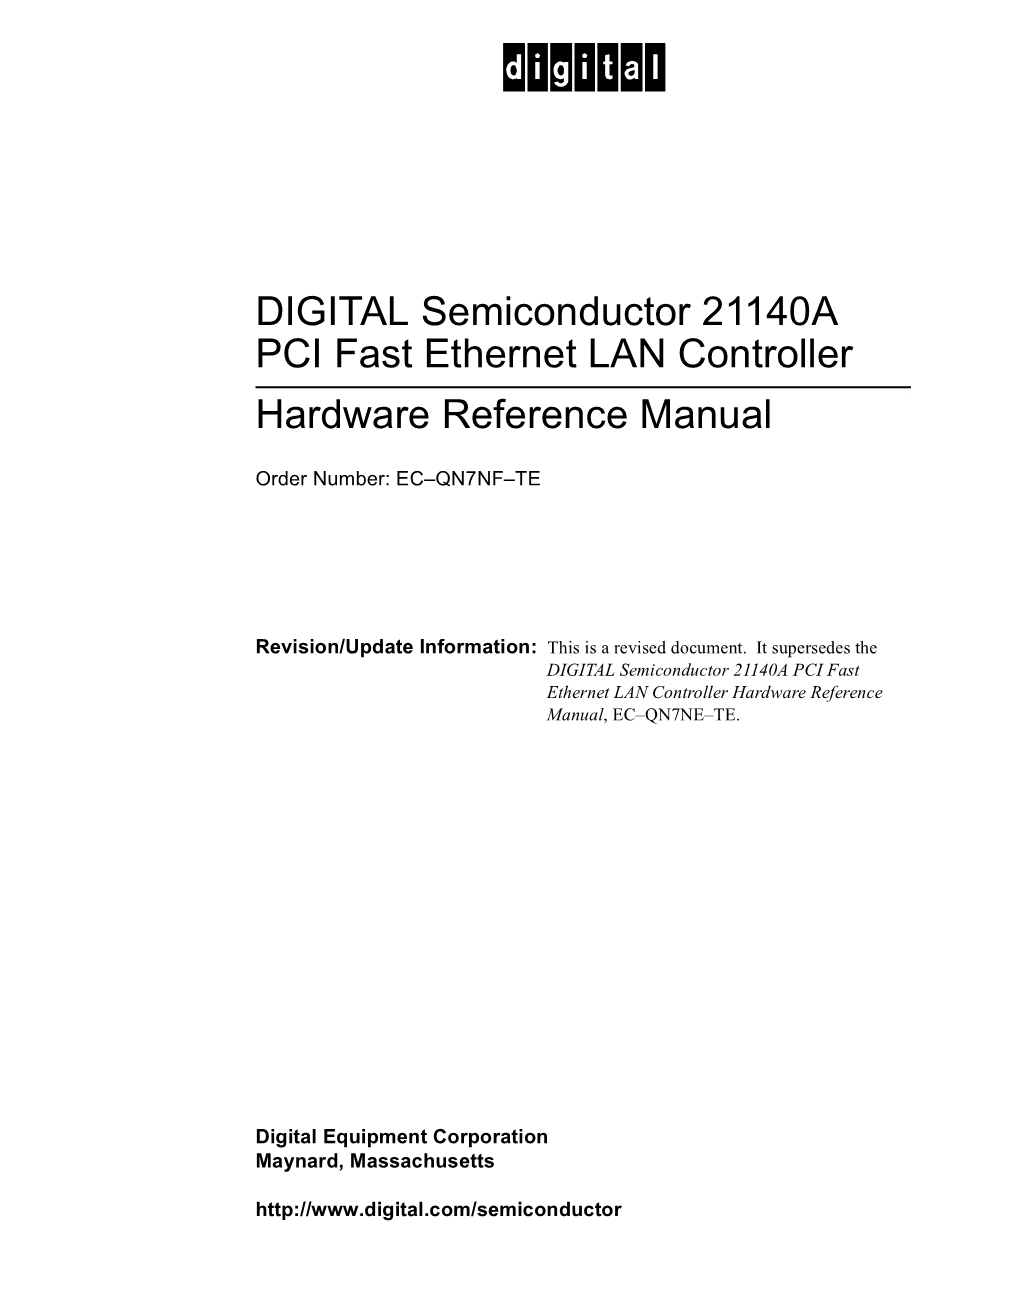 DIGITAL Semiconductor 21140A PCI Fast Ethernet LAN Controller Hardware Reference Manual